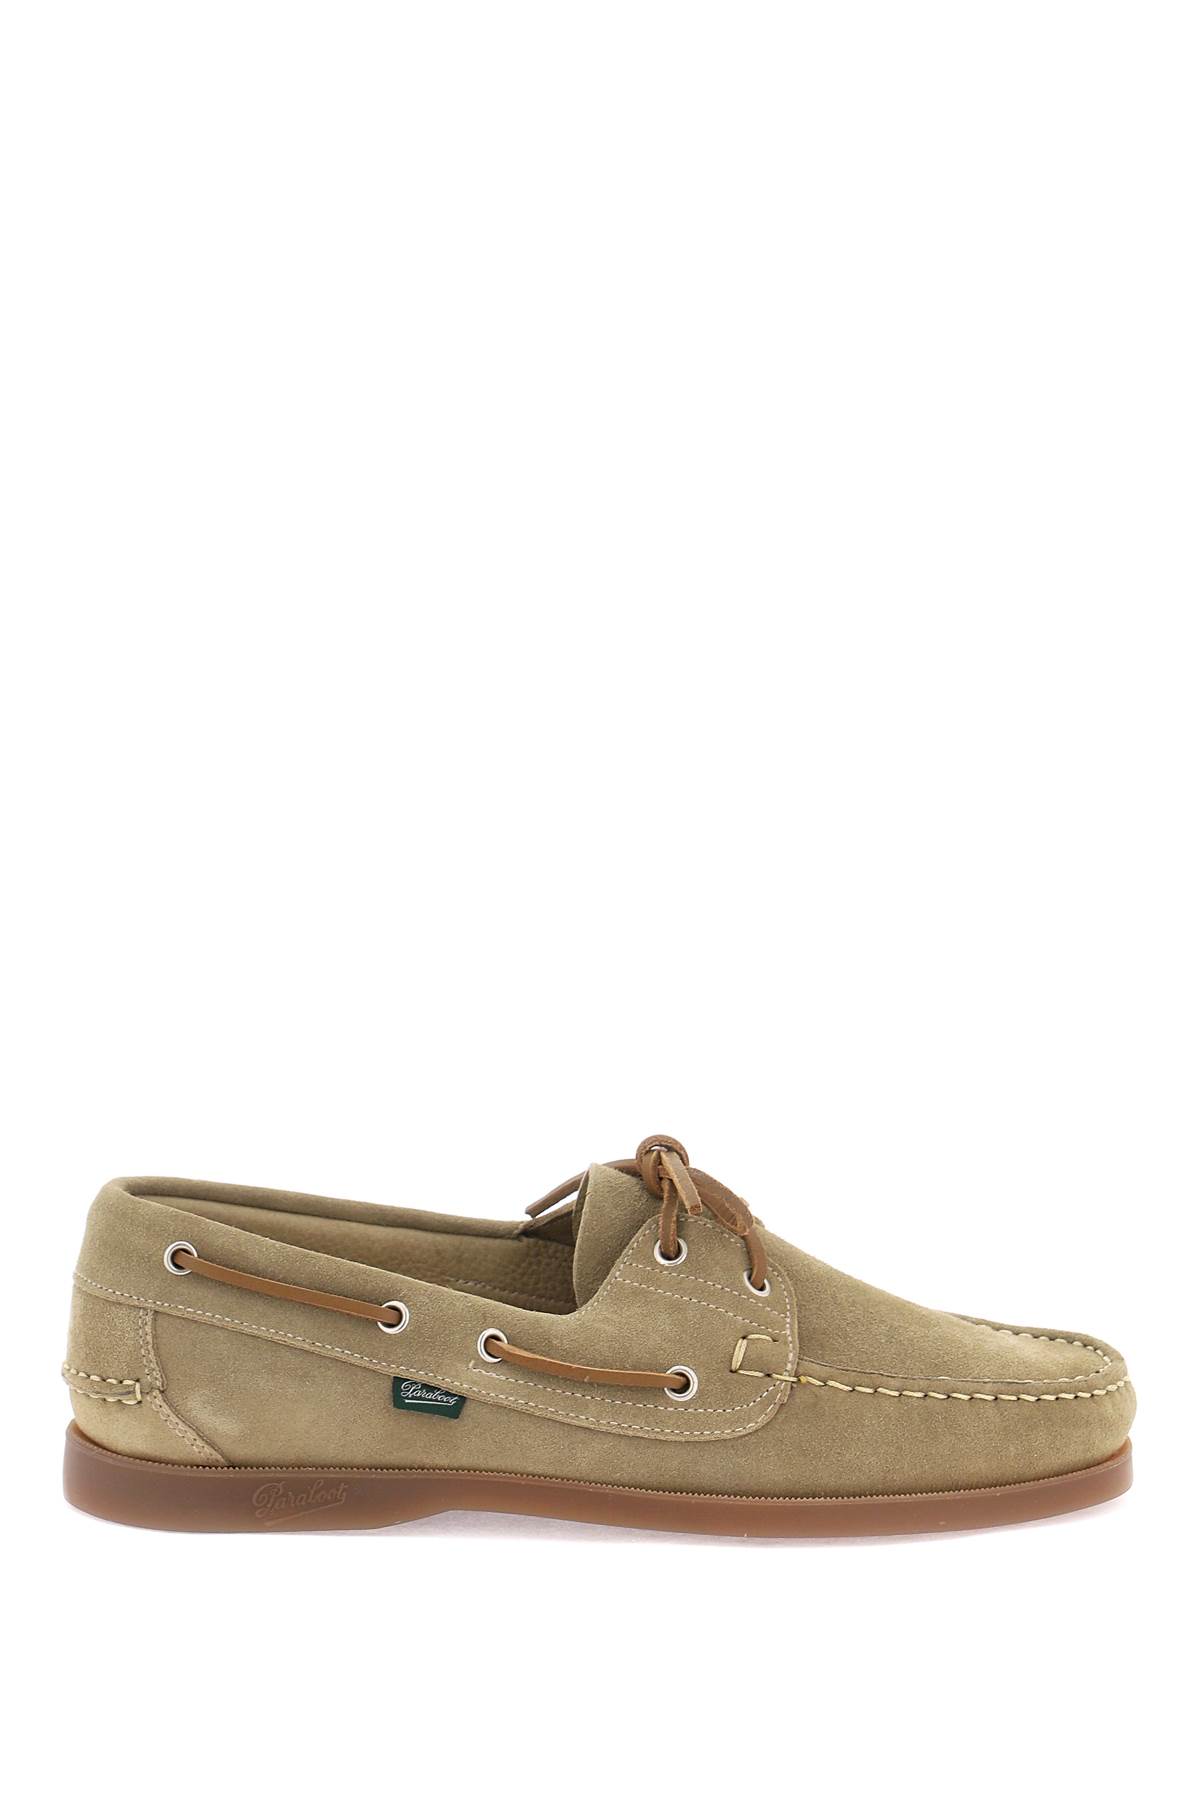 Shop Paraboot Barth Loafers In Miel Vel Sand (beige)